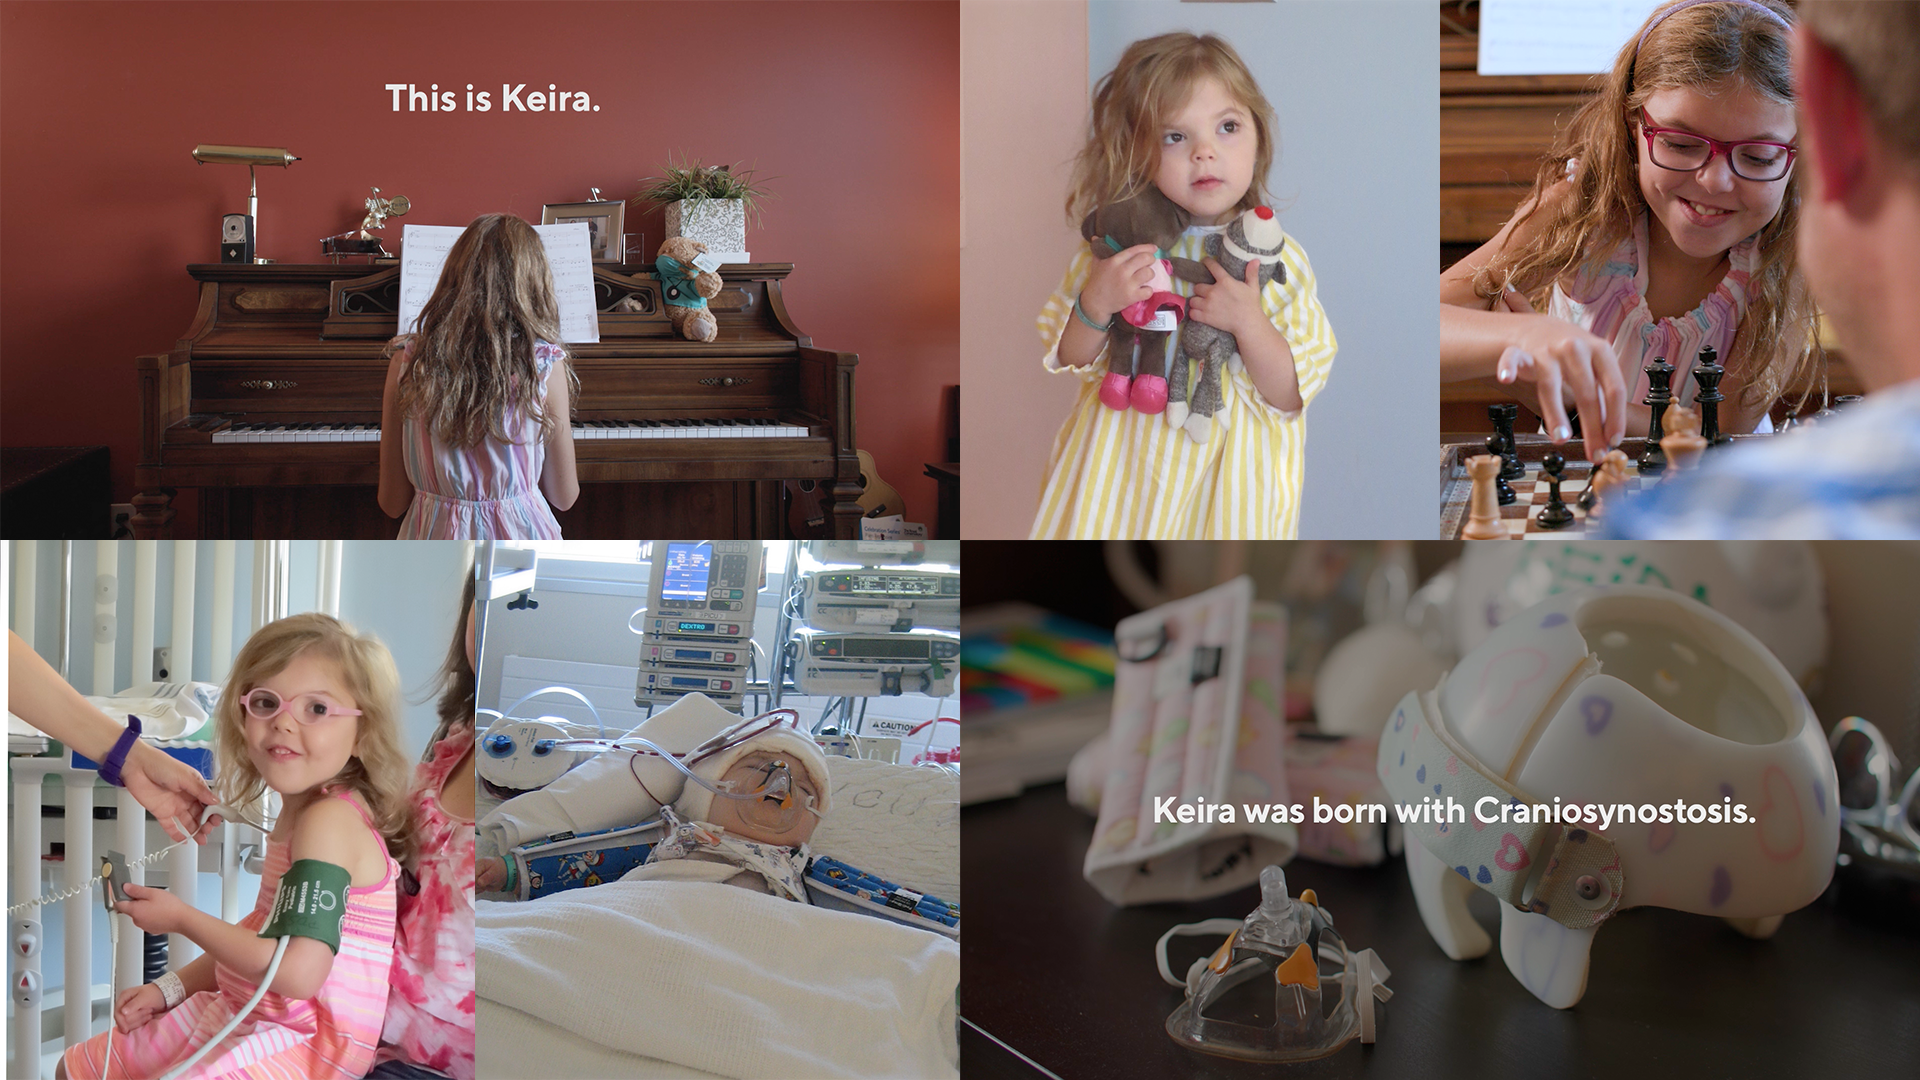 A collage of images showing Keira in the hospital, playing piano, and playing chess with her father.